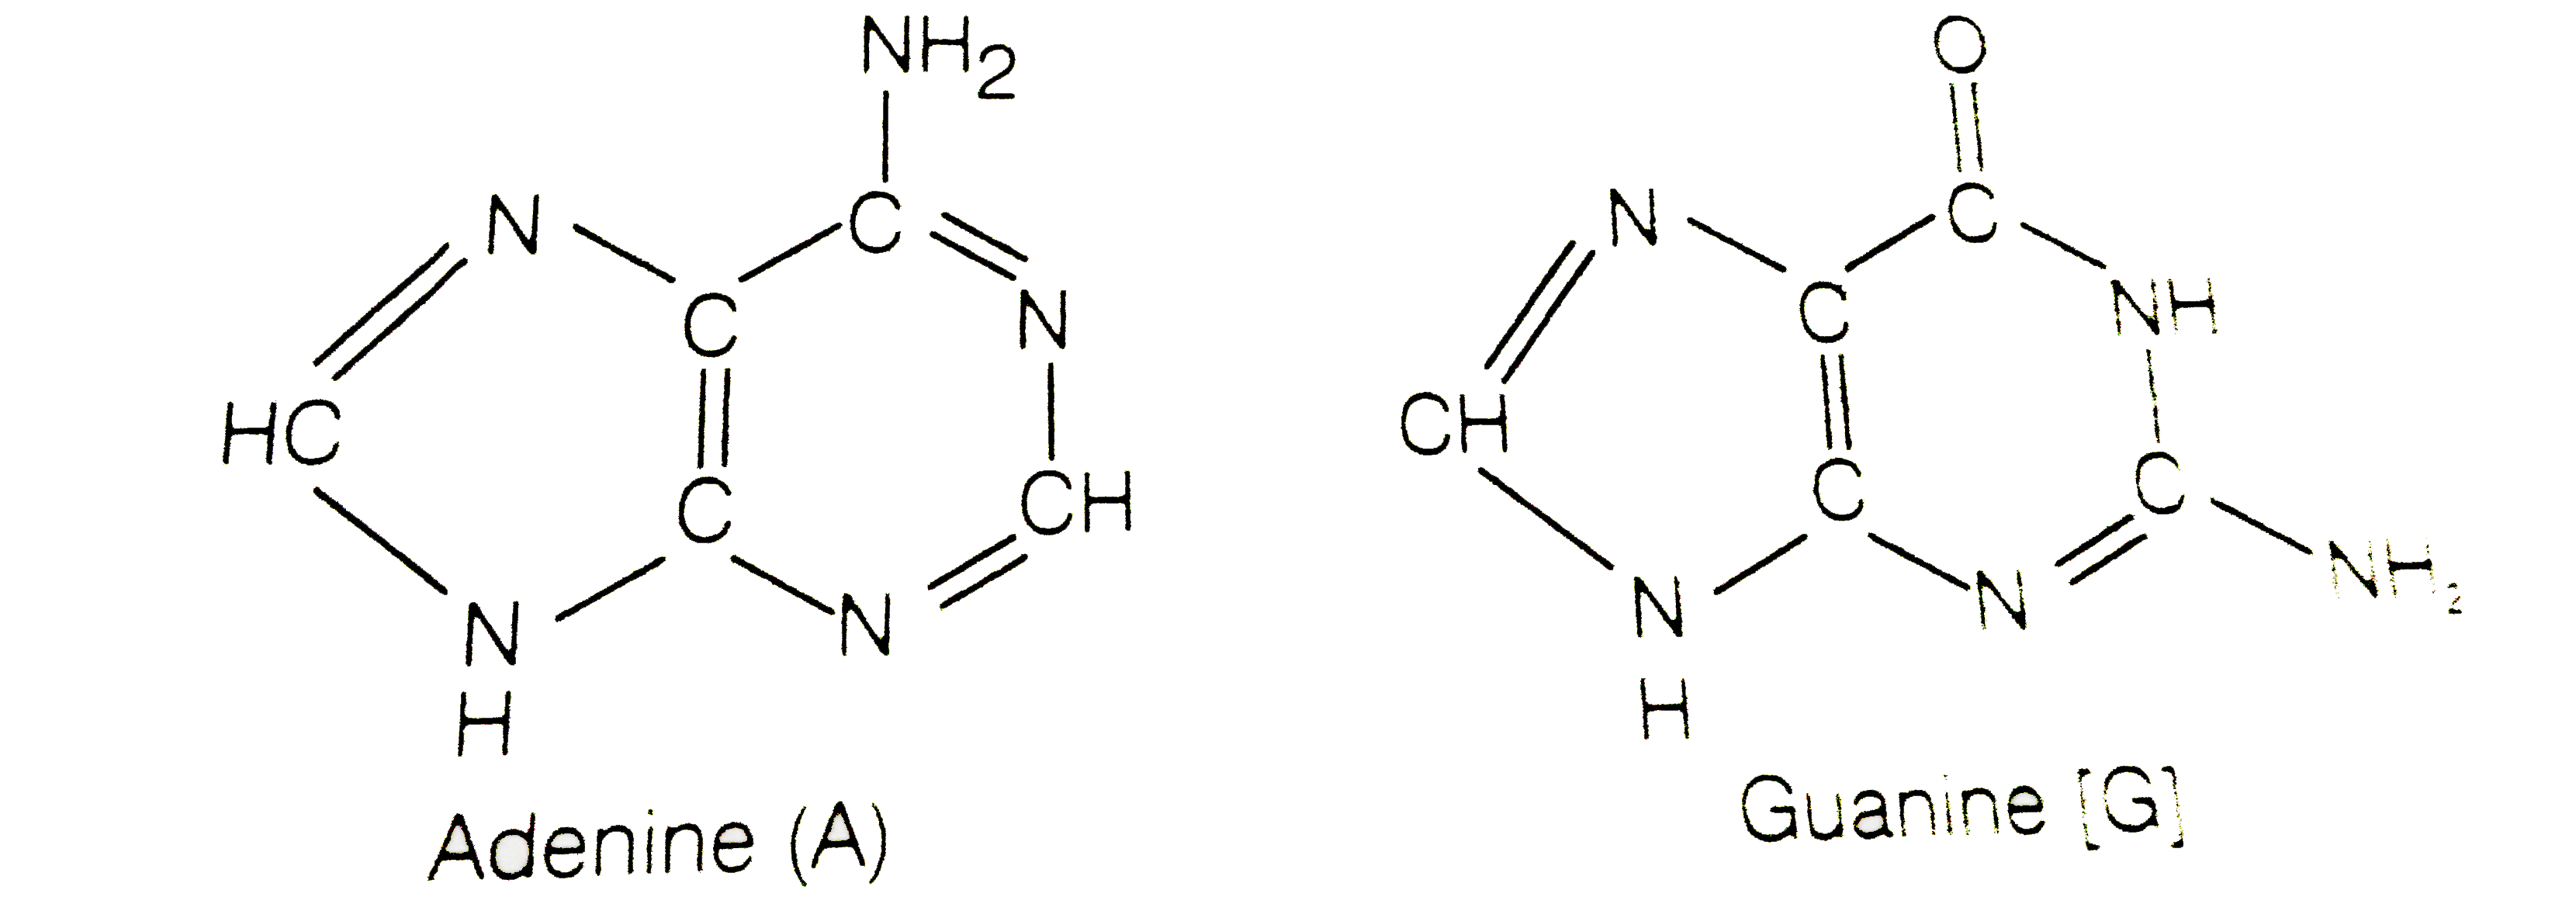 The Chemical Synthesis of Oligonucleotides